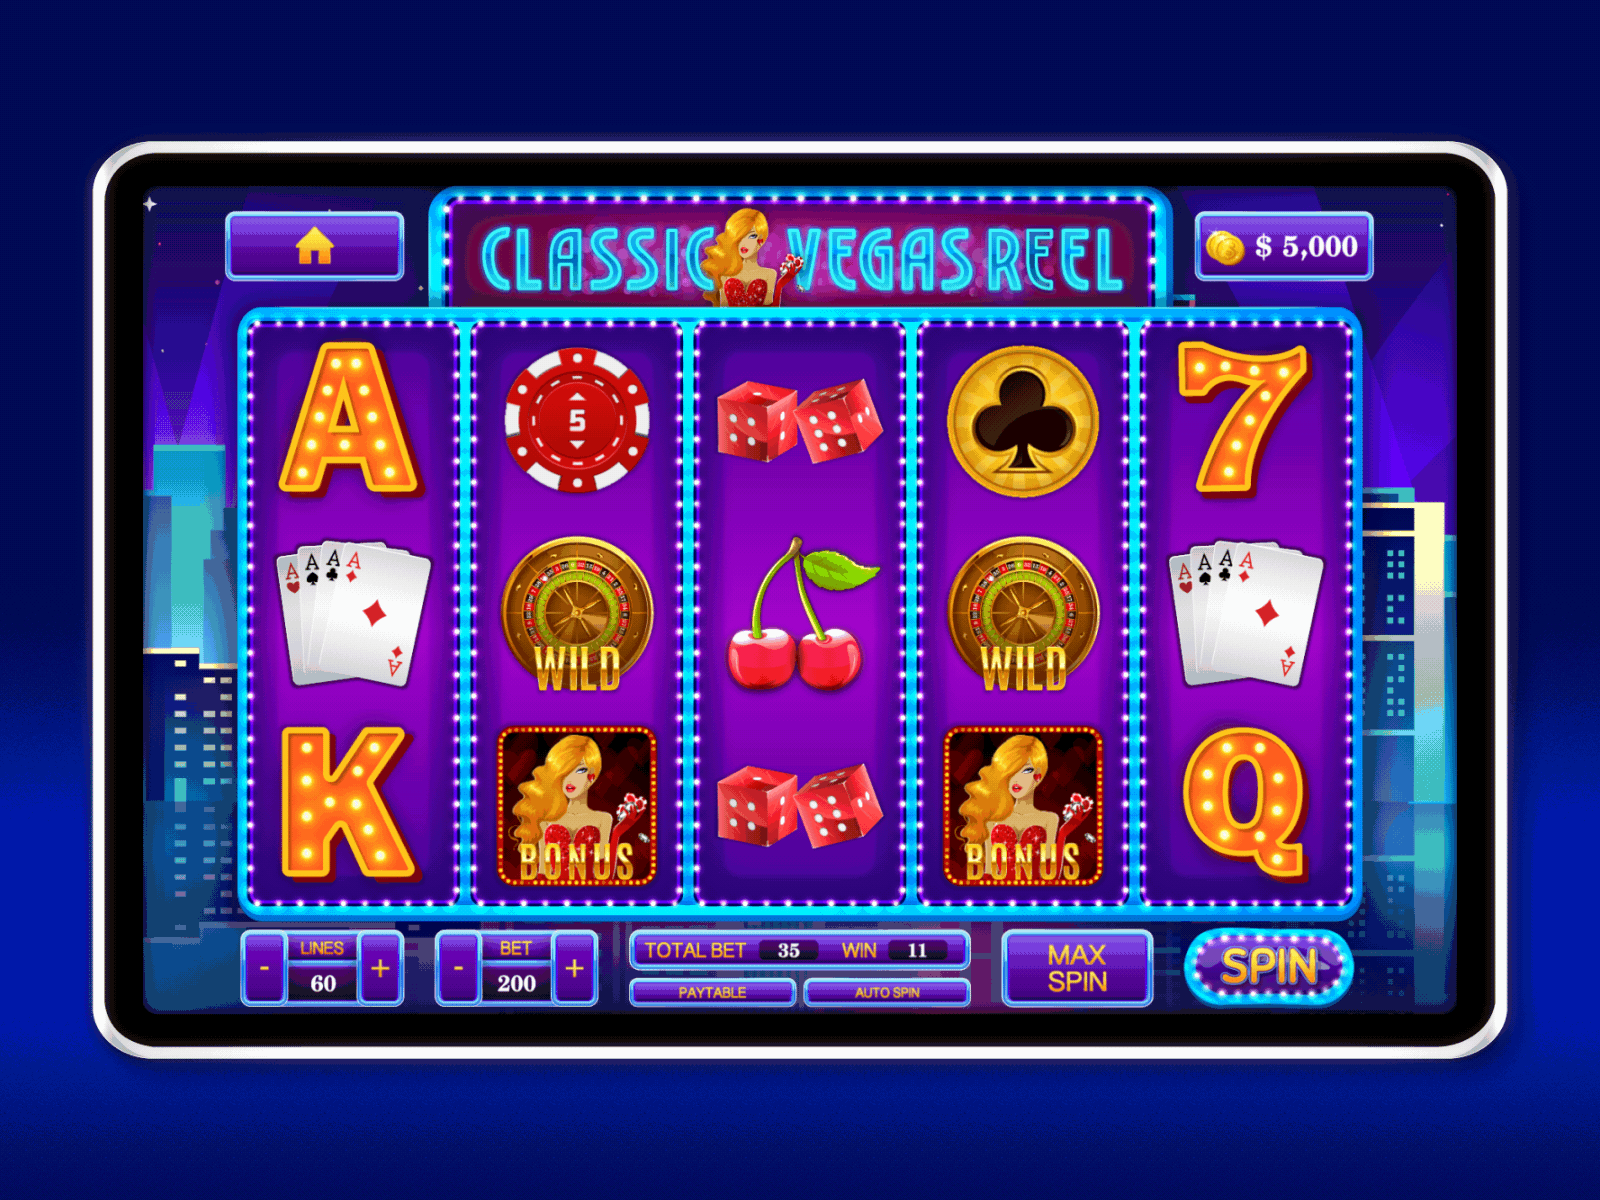 The Psychology Behind Casino Game Design: Colour Schemes, Sounds, and More